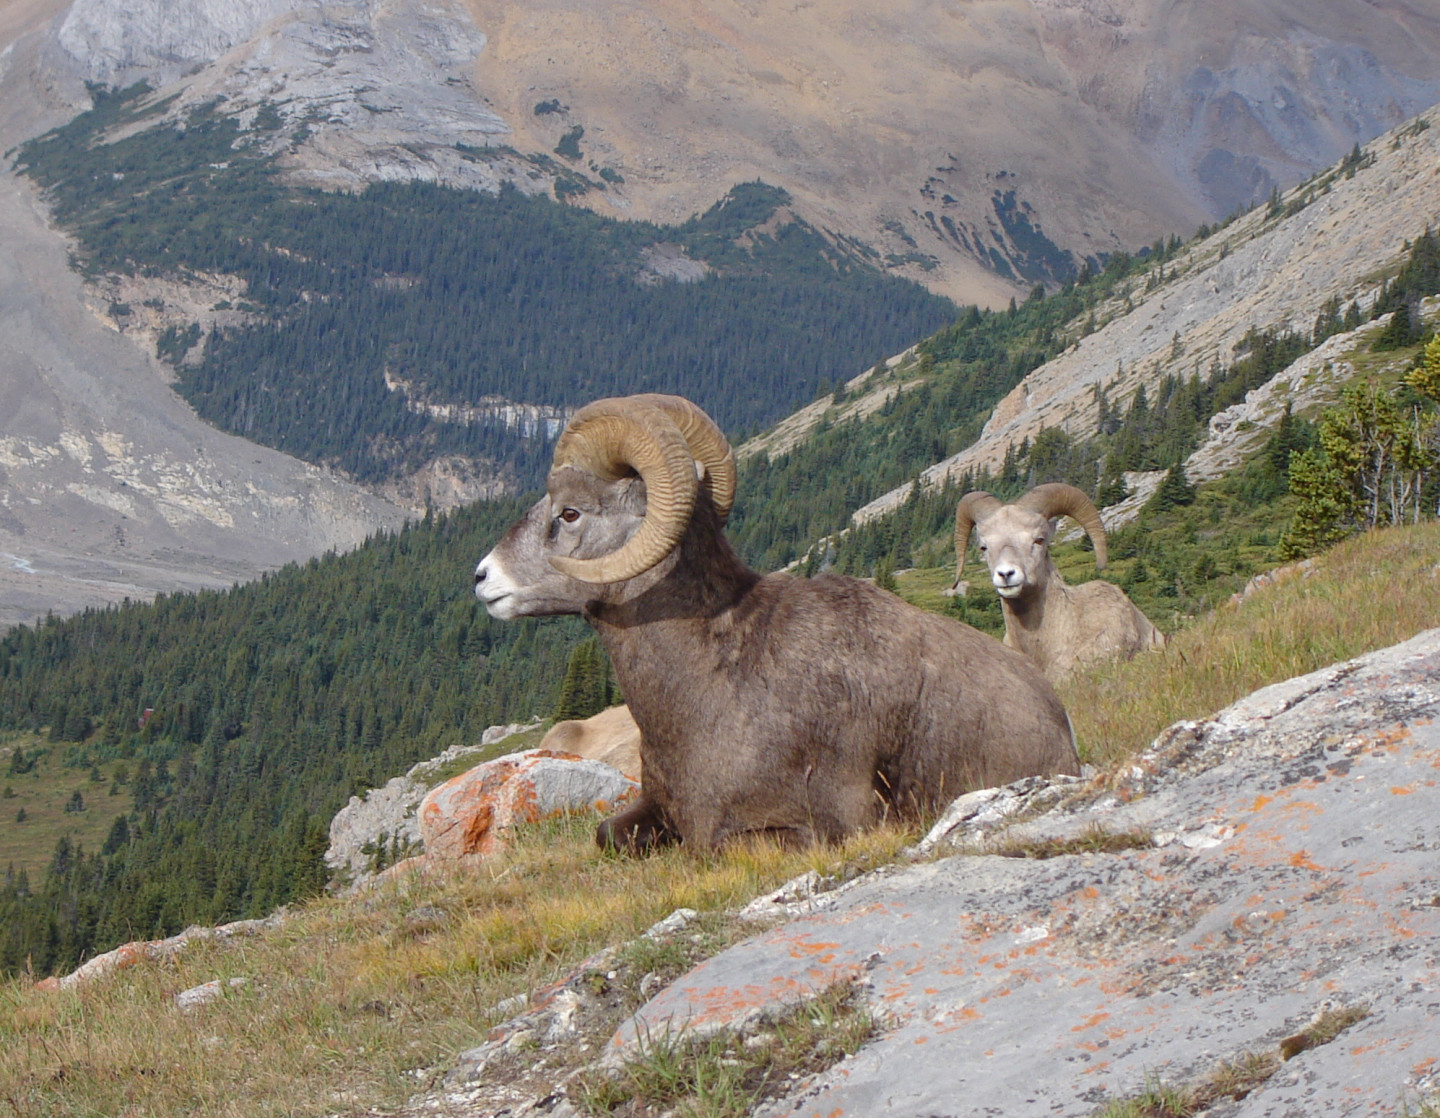 Two bighorn sheep sit in Wilcox Pass in Jasper National Park, Alberta, behind them a forest of evergreens with a mountain rising in the distance.